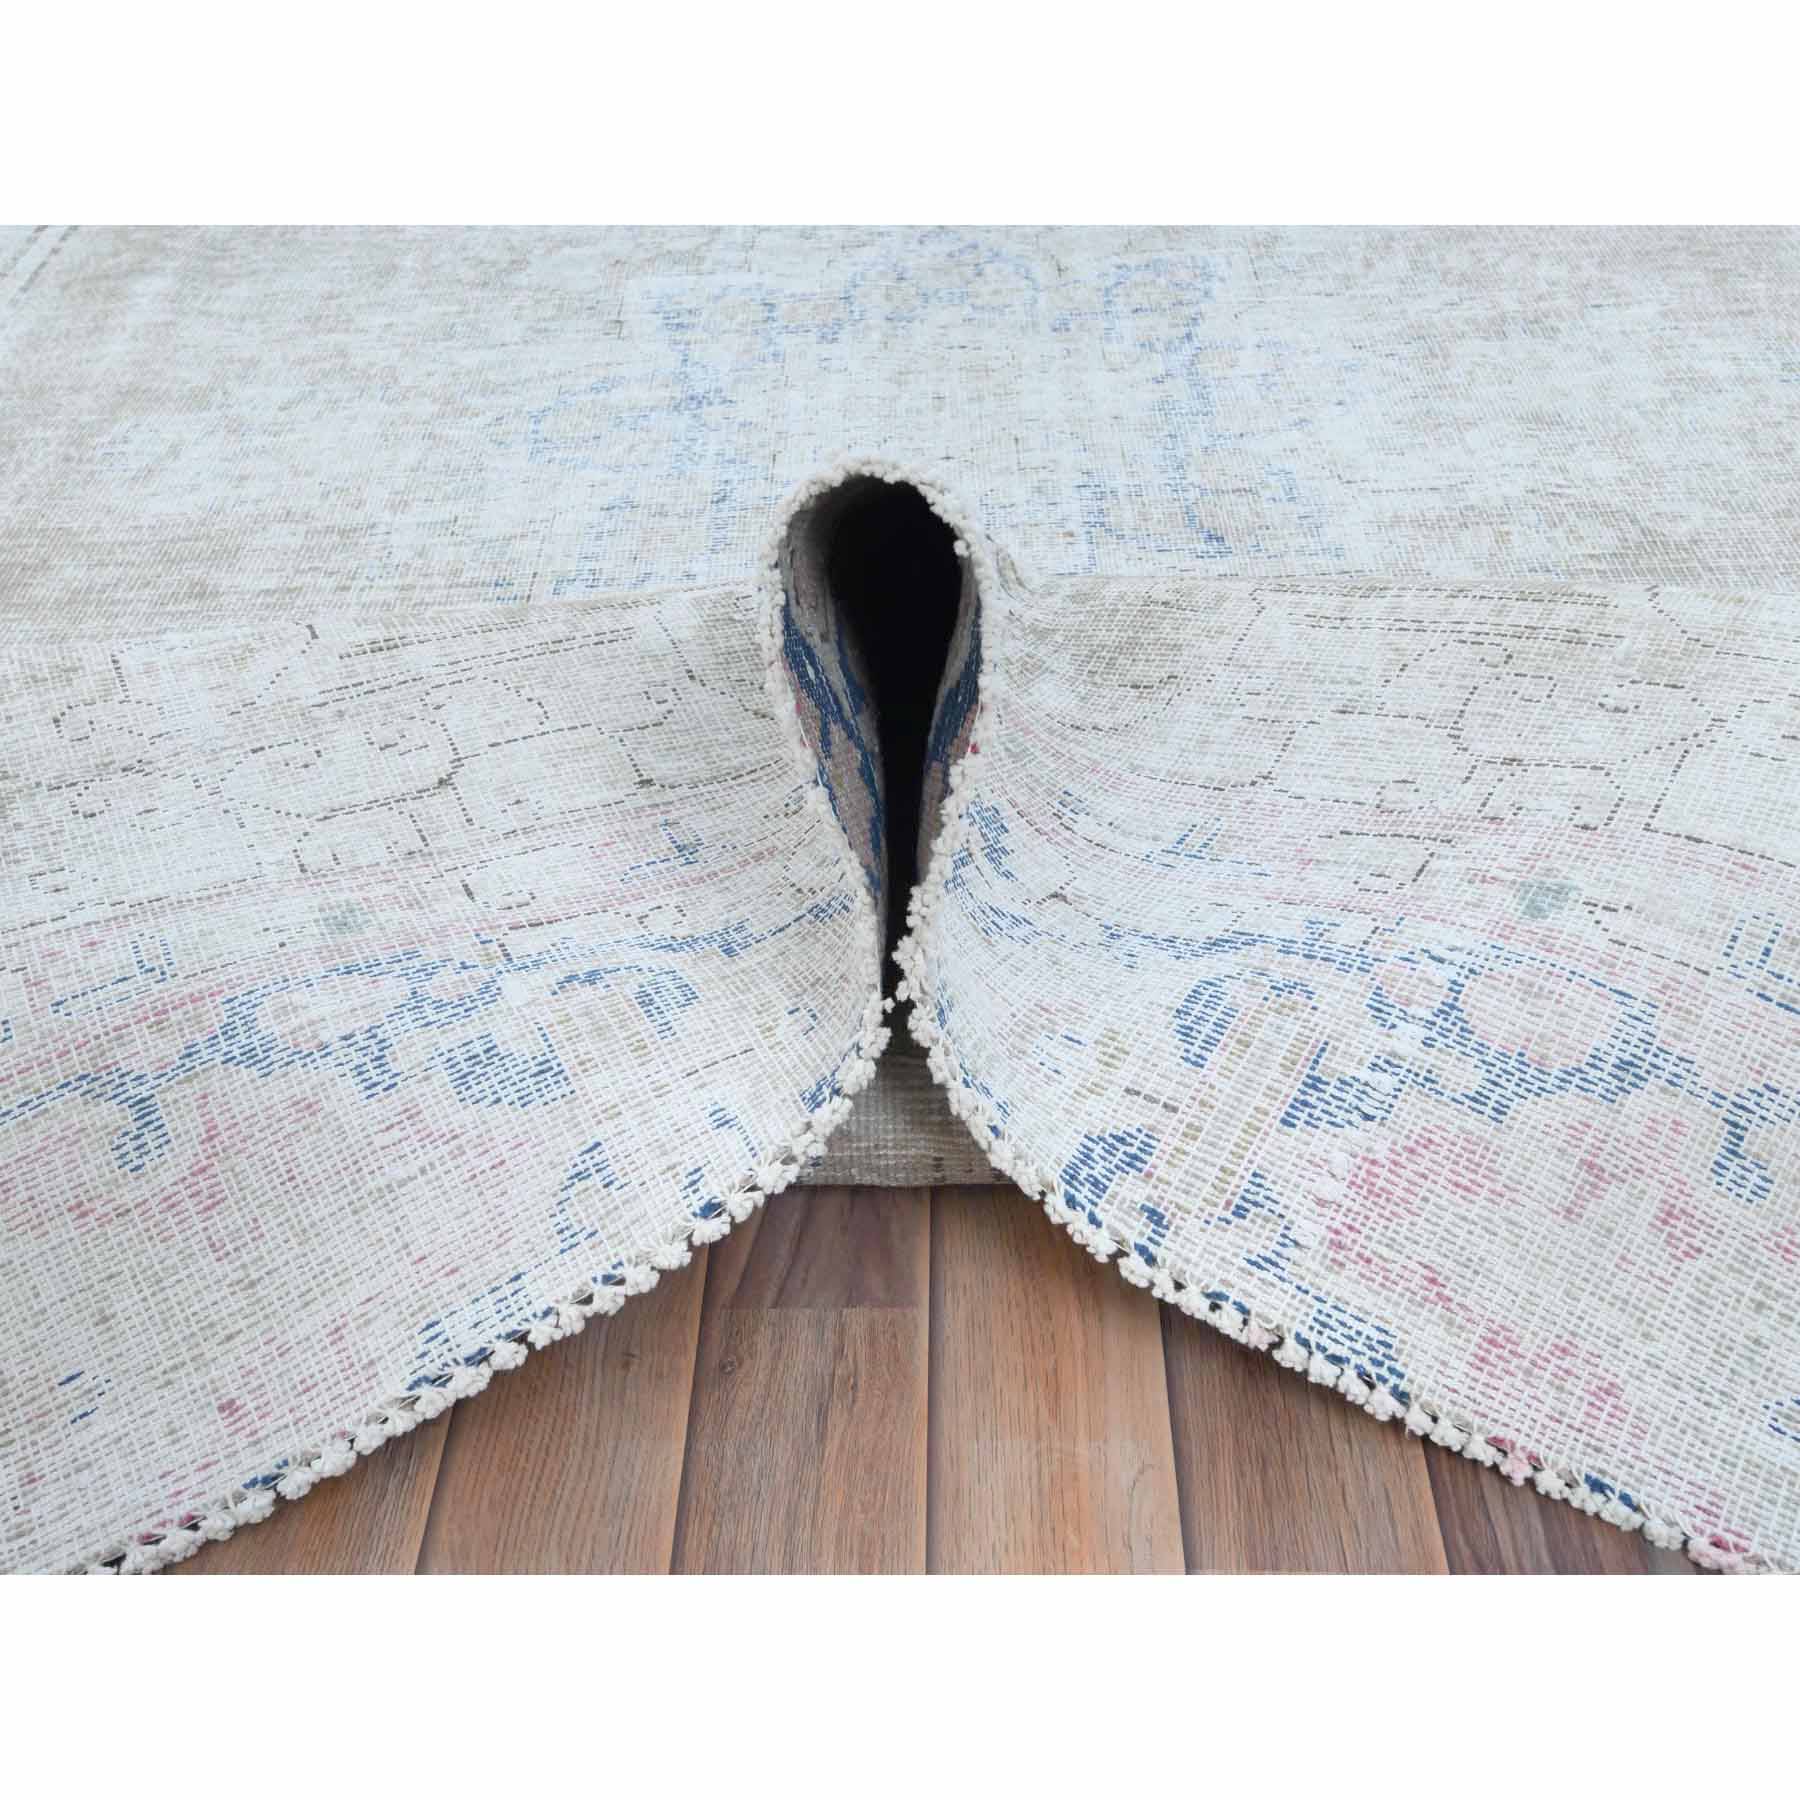 Overdyed-Vintage-Hand-Knotted-Rug-406245